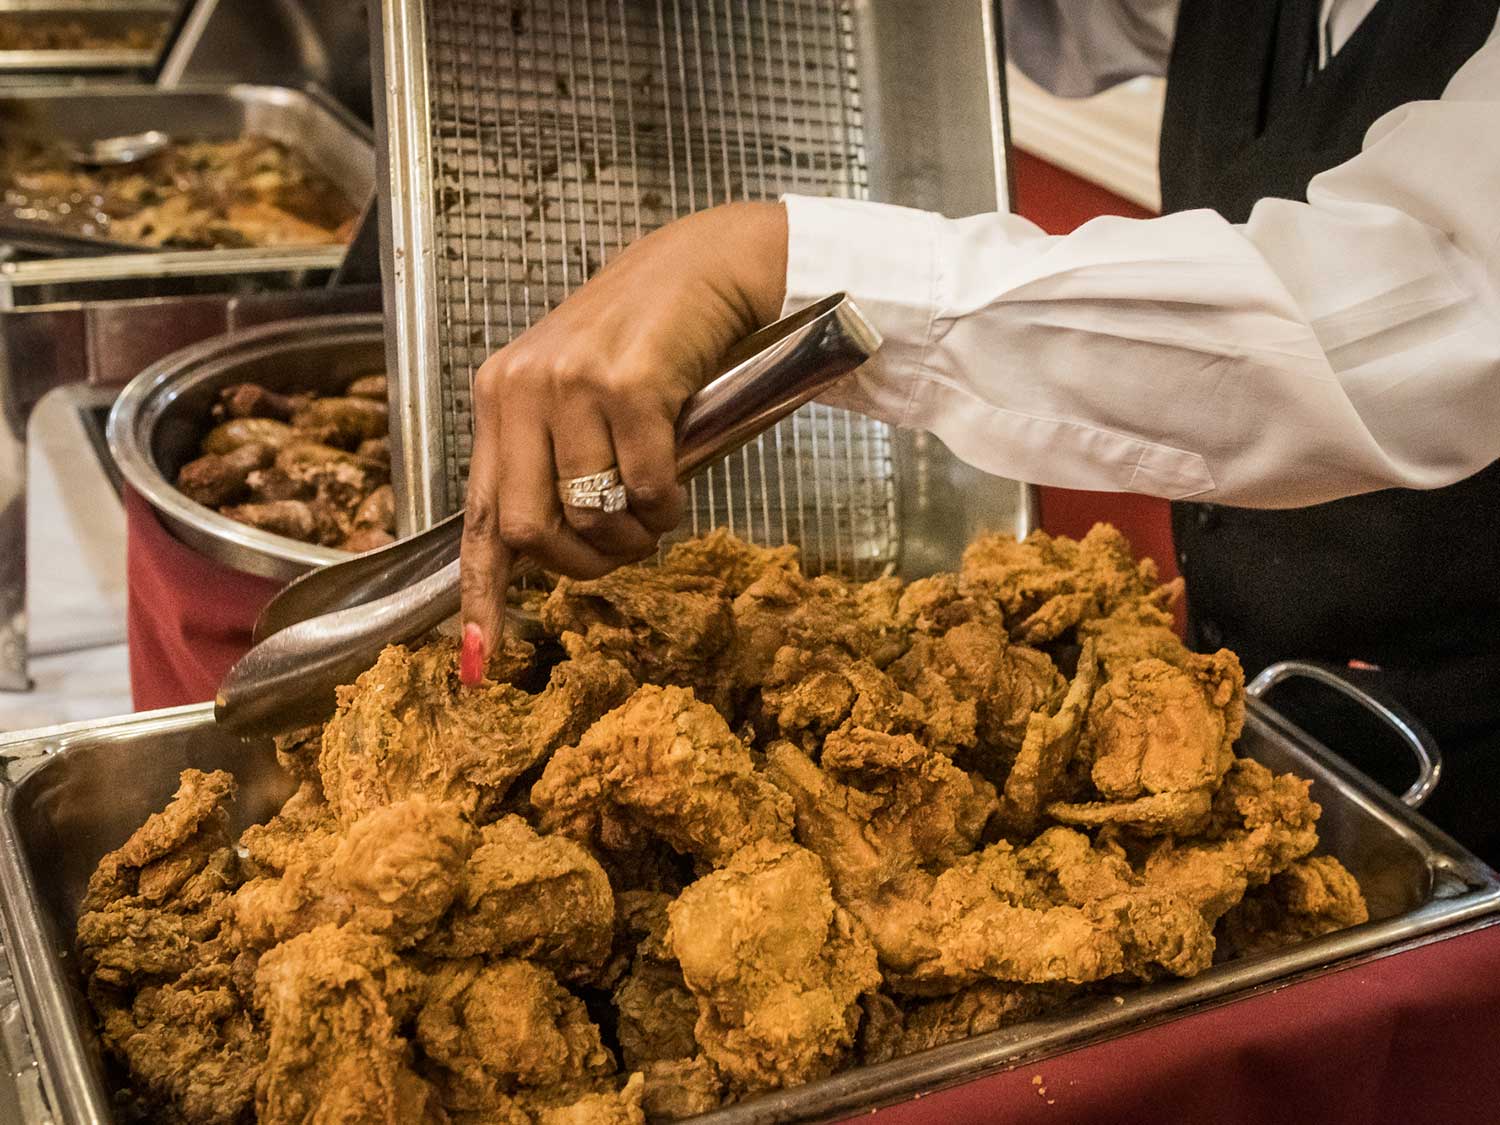 strip Wortel Middellandse Zee Lunch At This Iconic New Orleans Restaurant Includes a Fried Chicken  Avalanche